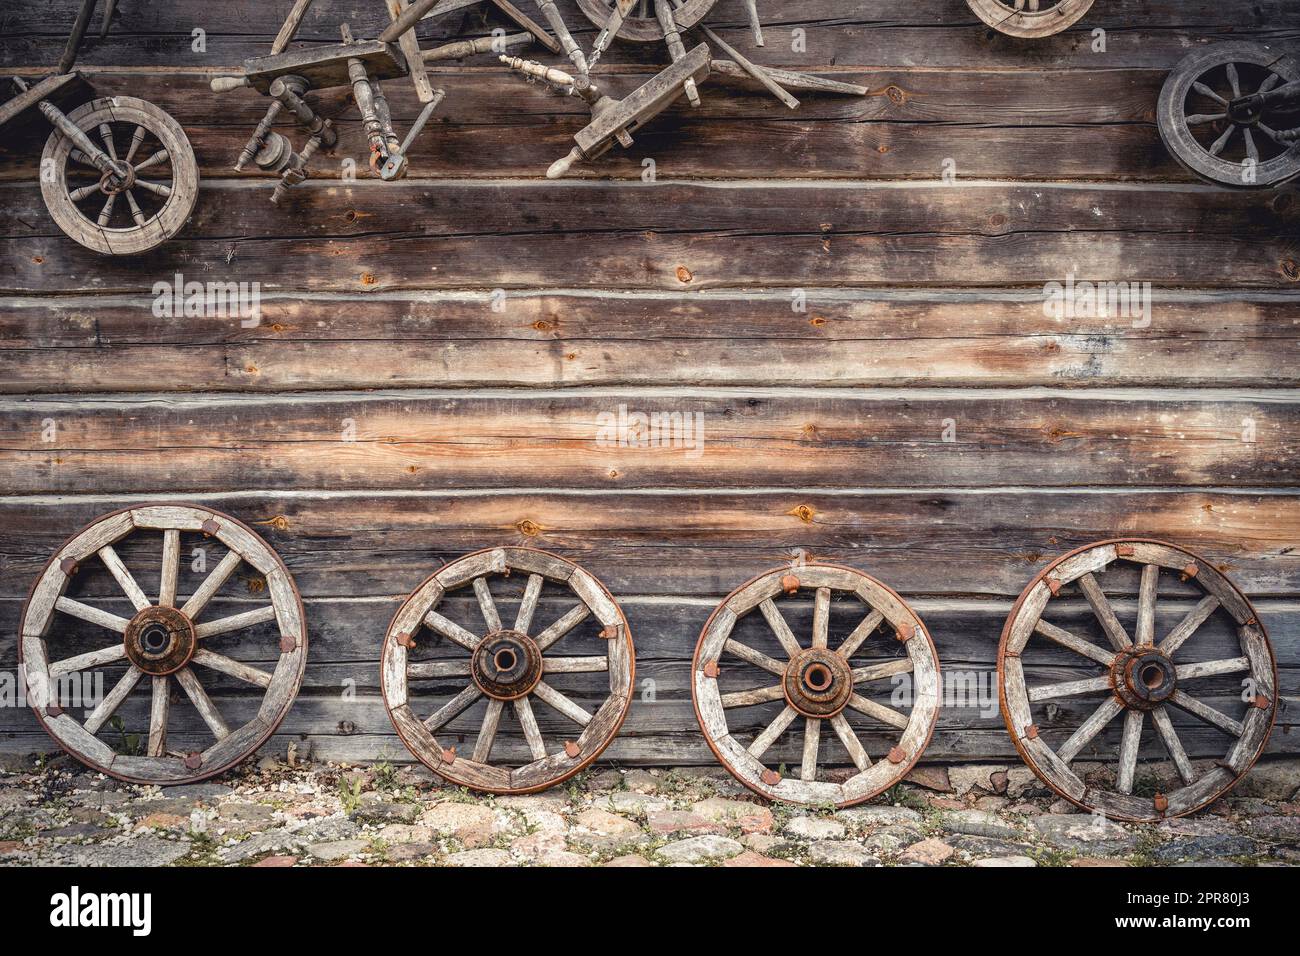 Wooden house wall and ancient wagon wheels, tools and stuff Stock Photo